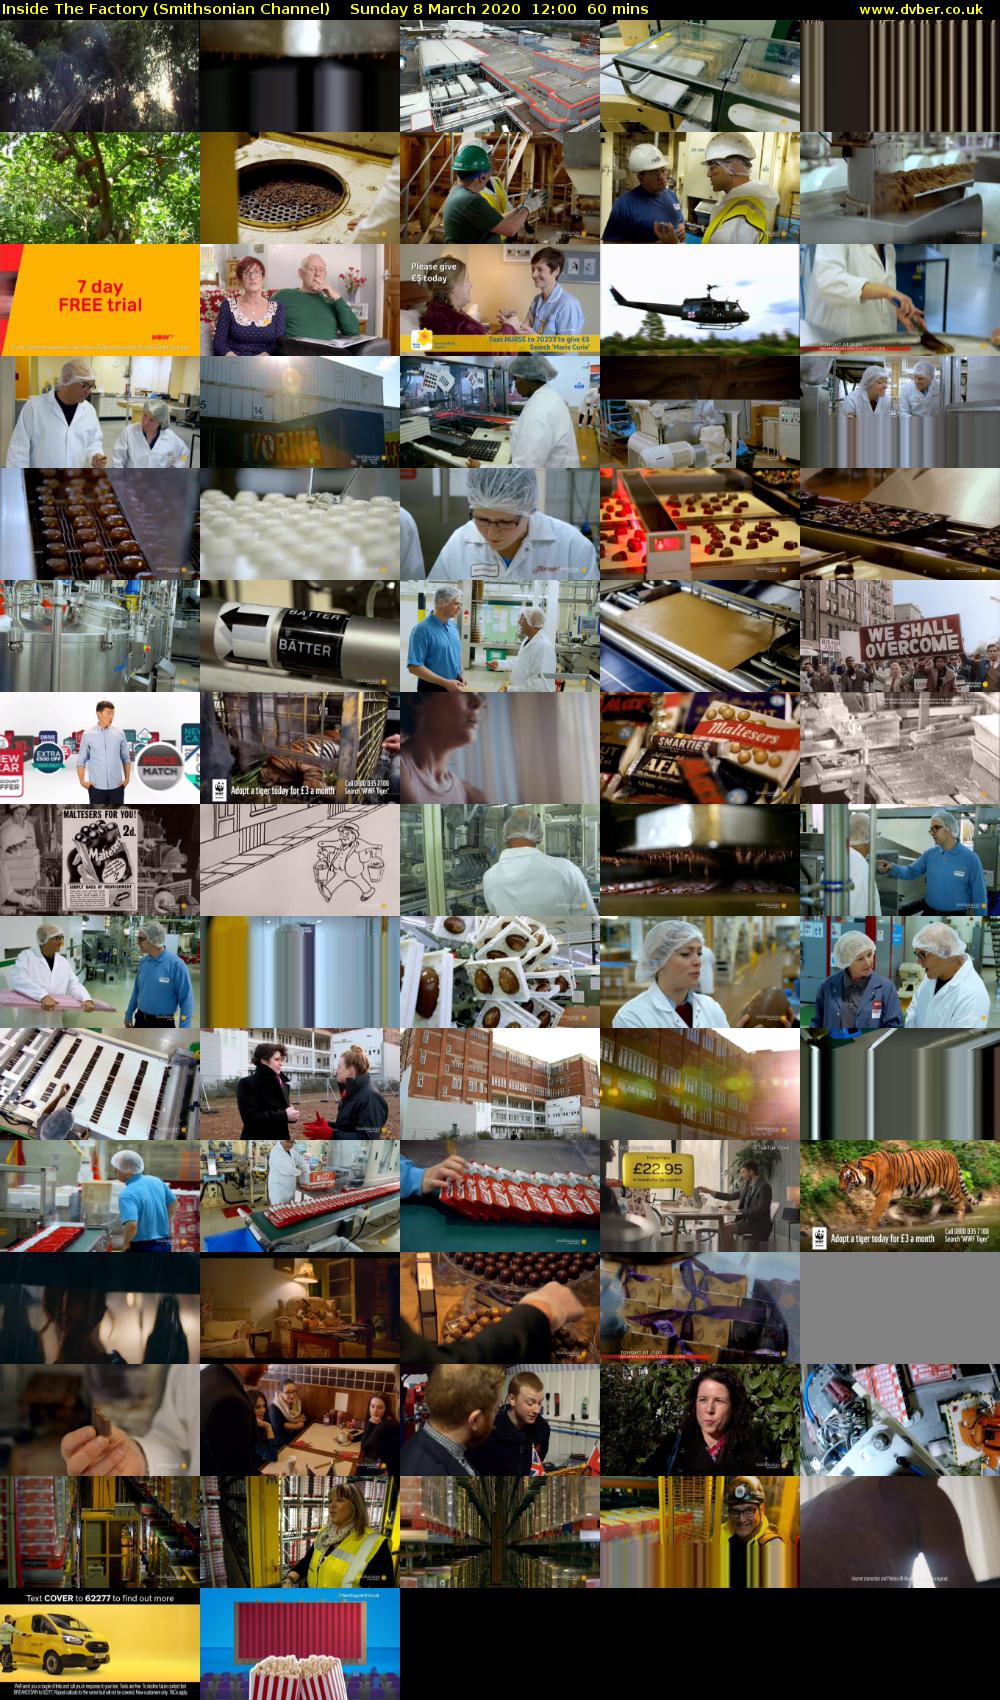 Inside The Factory (Smithsonian Channel) Sunday 8 March 2020 12:00 - 13:00